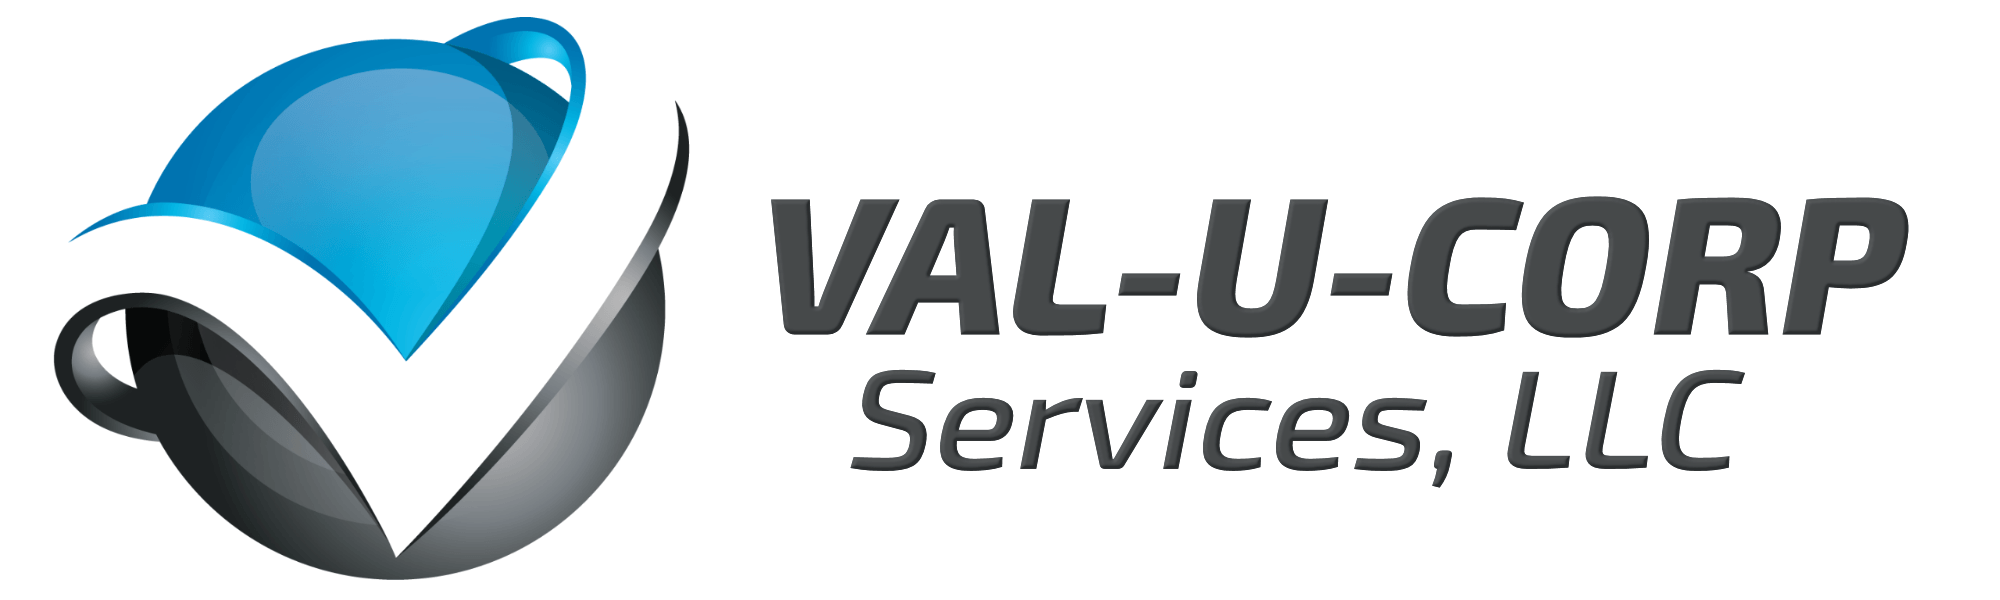 Corp U Logo - Val-U-Corp Services - Set up your business right!